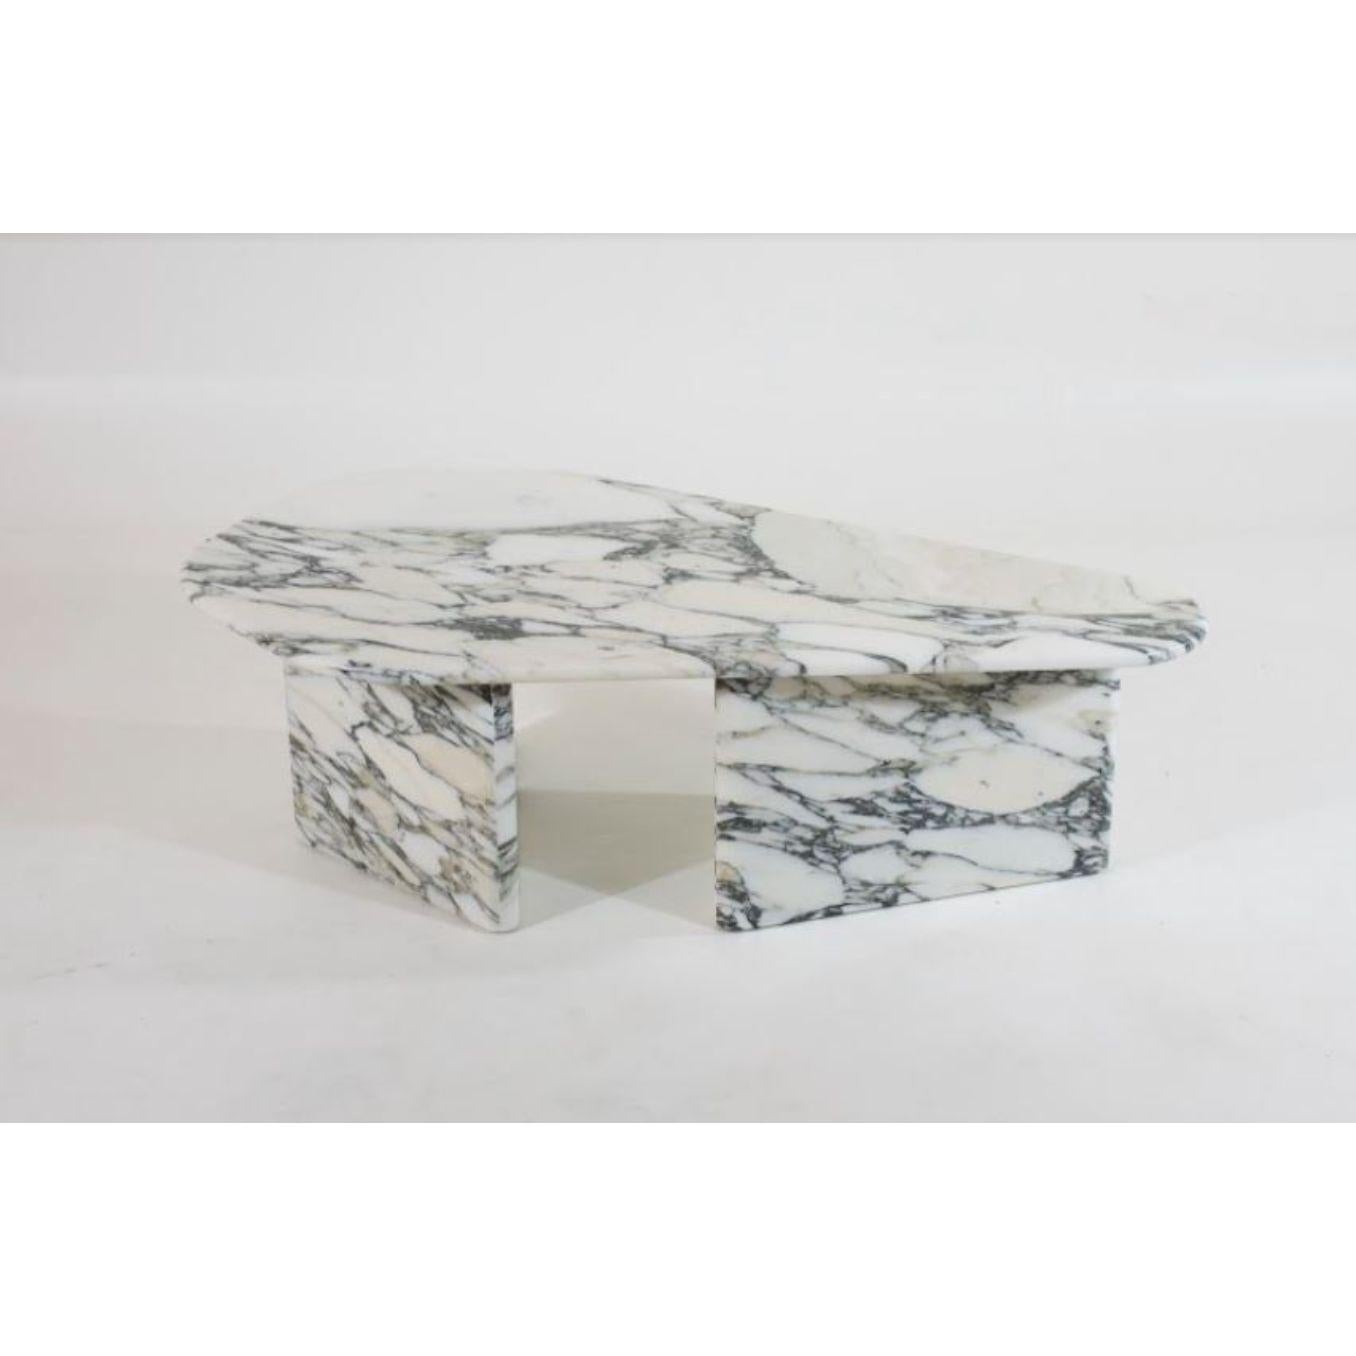 Contemporary Collected Memory Coffee Table 2 by Claste